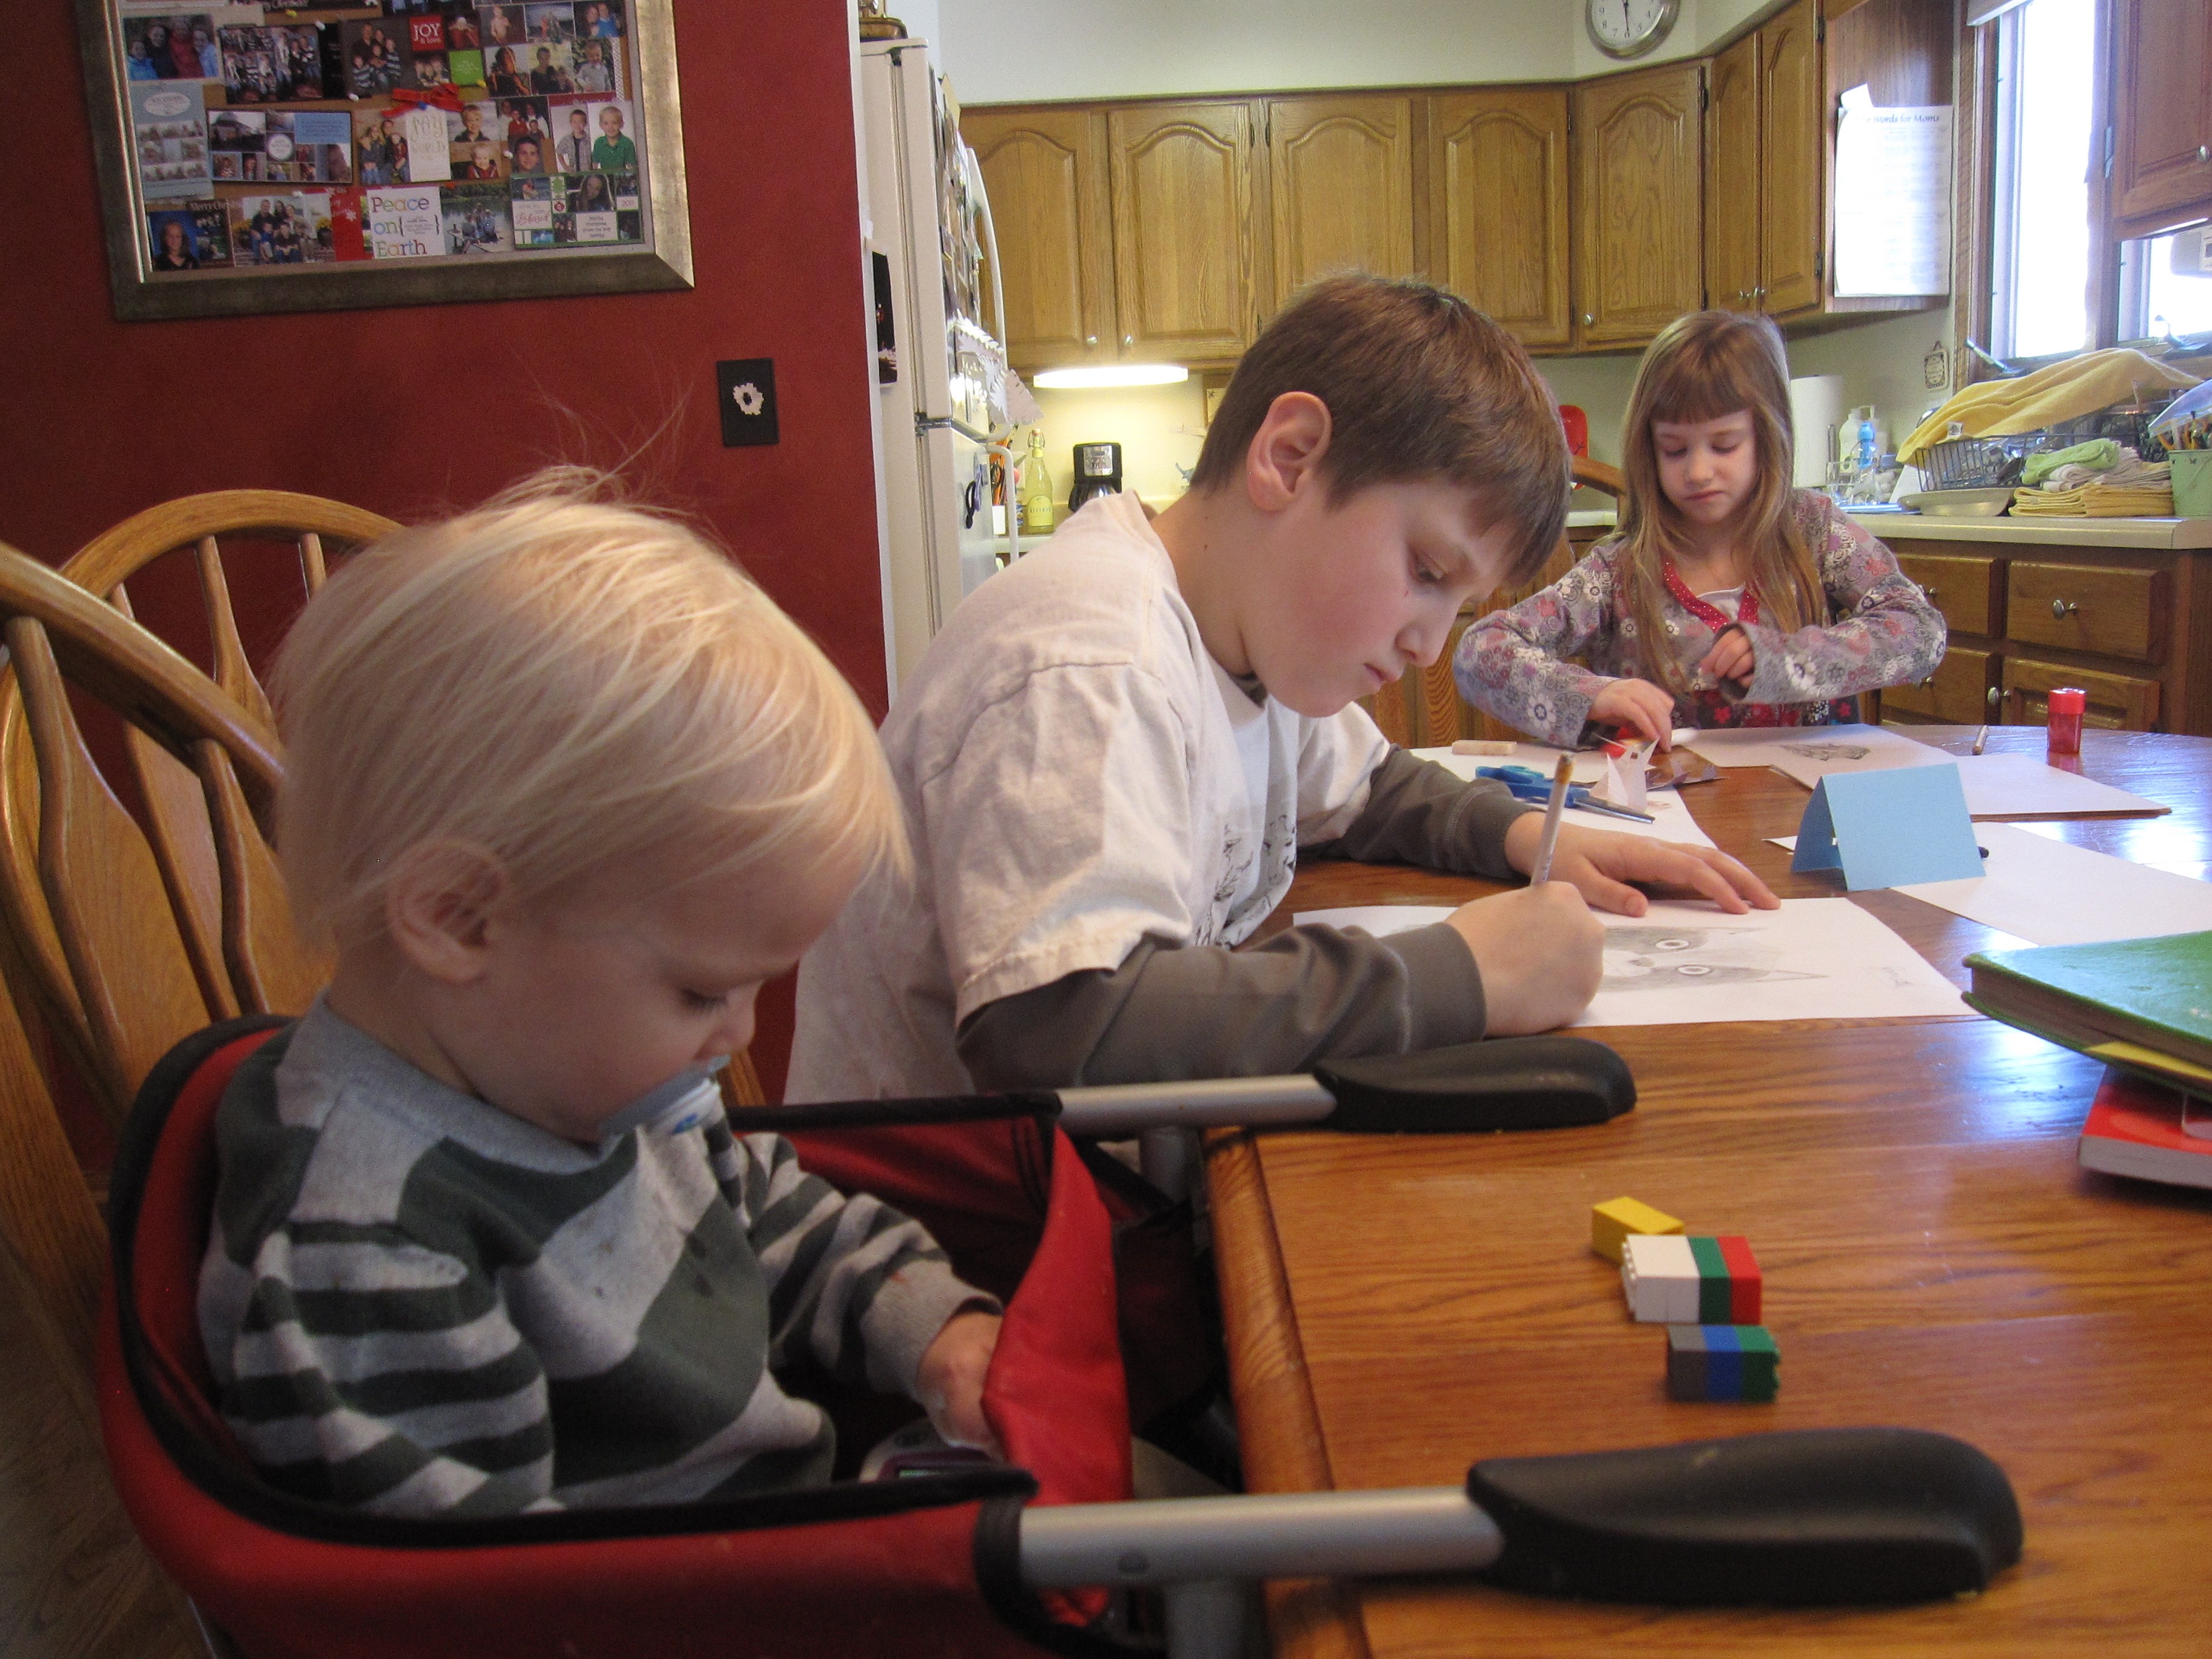 advantages and disadvantages of homeschooling